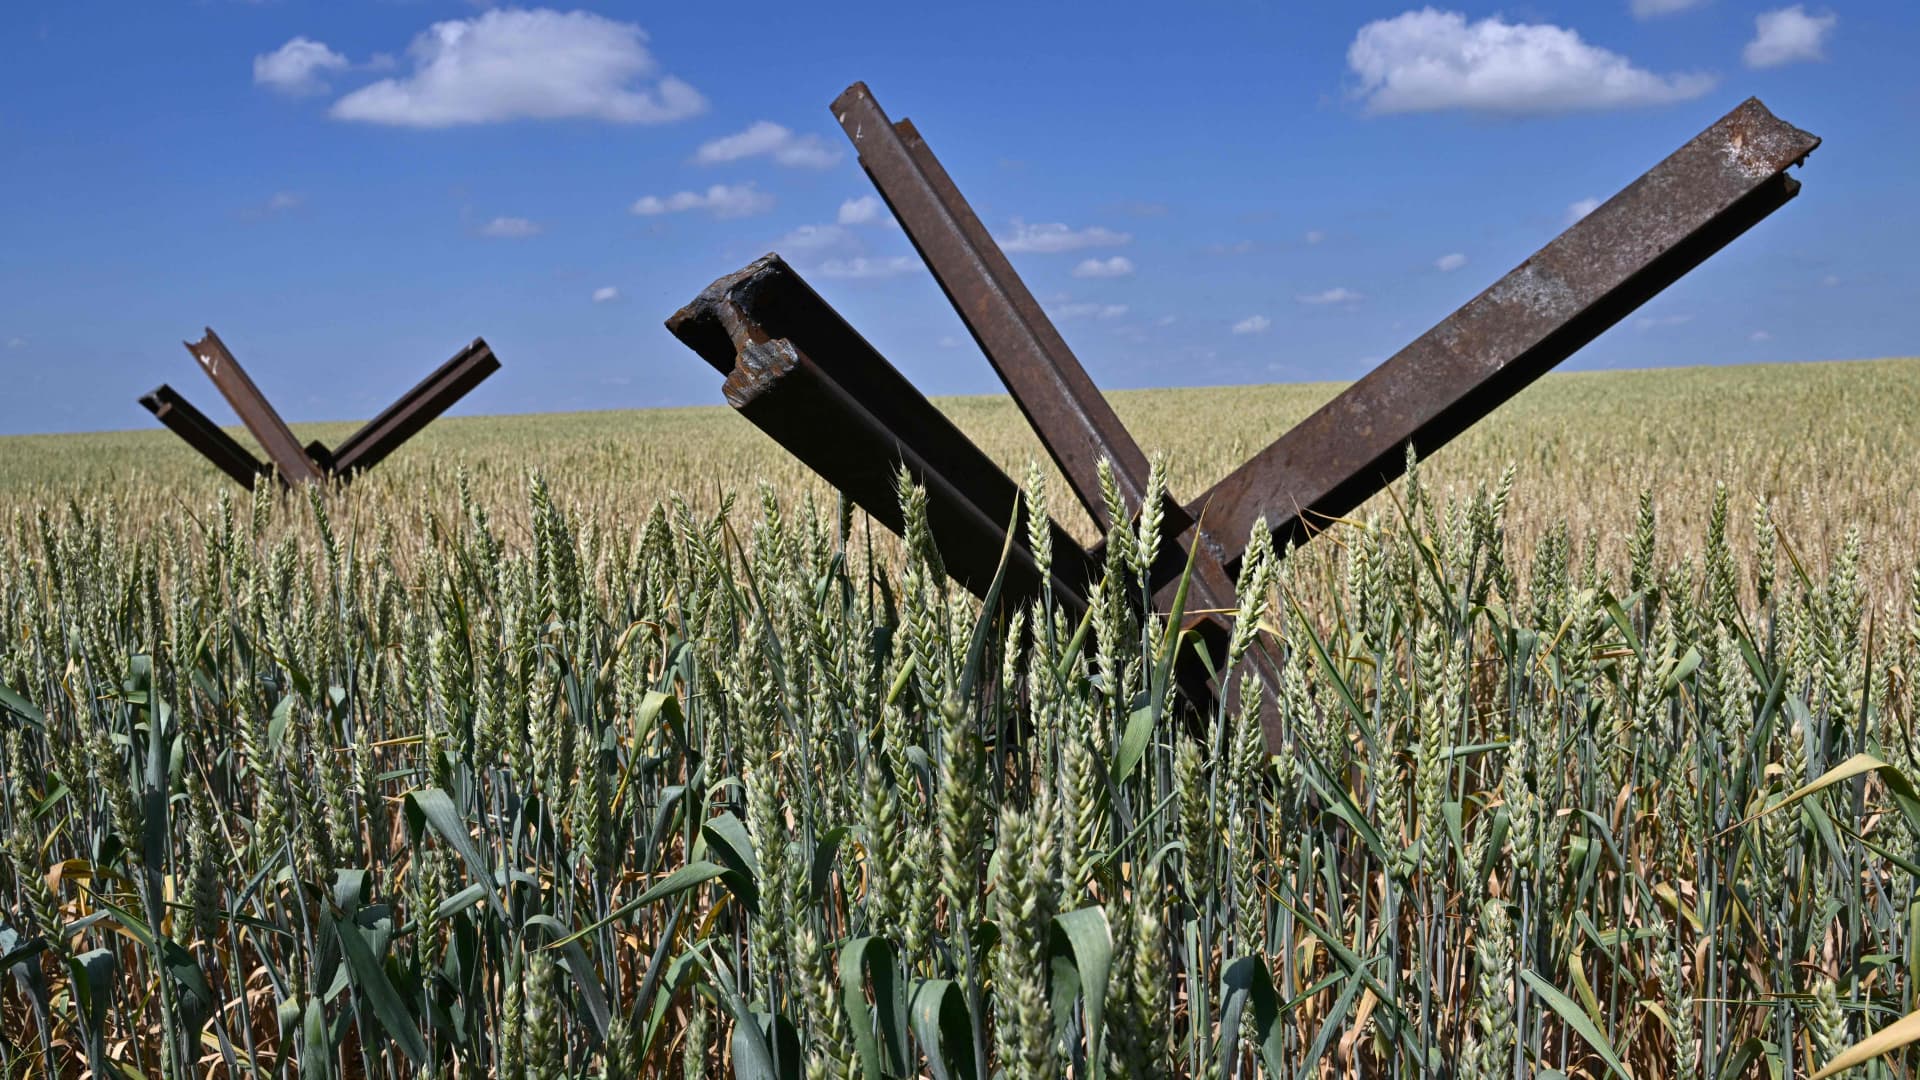 A photograph shows anti-tank obstacles on a wheat field at a farm in southern Ukraines Mykolaiv region, on June 11, 2022, amid the Russian invasion of Ukraine.